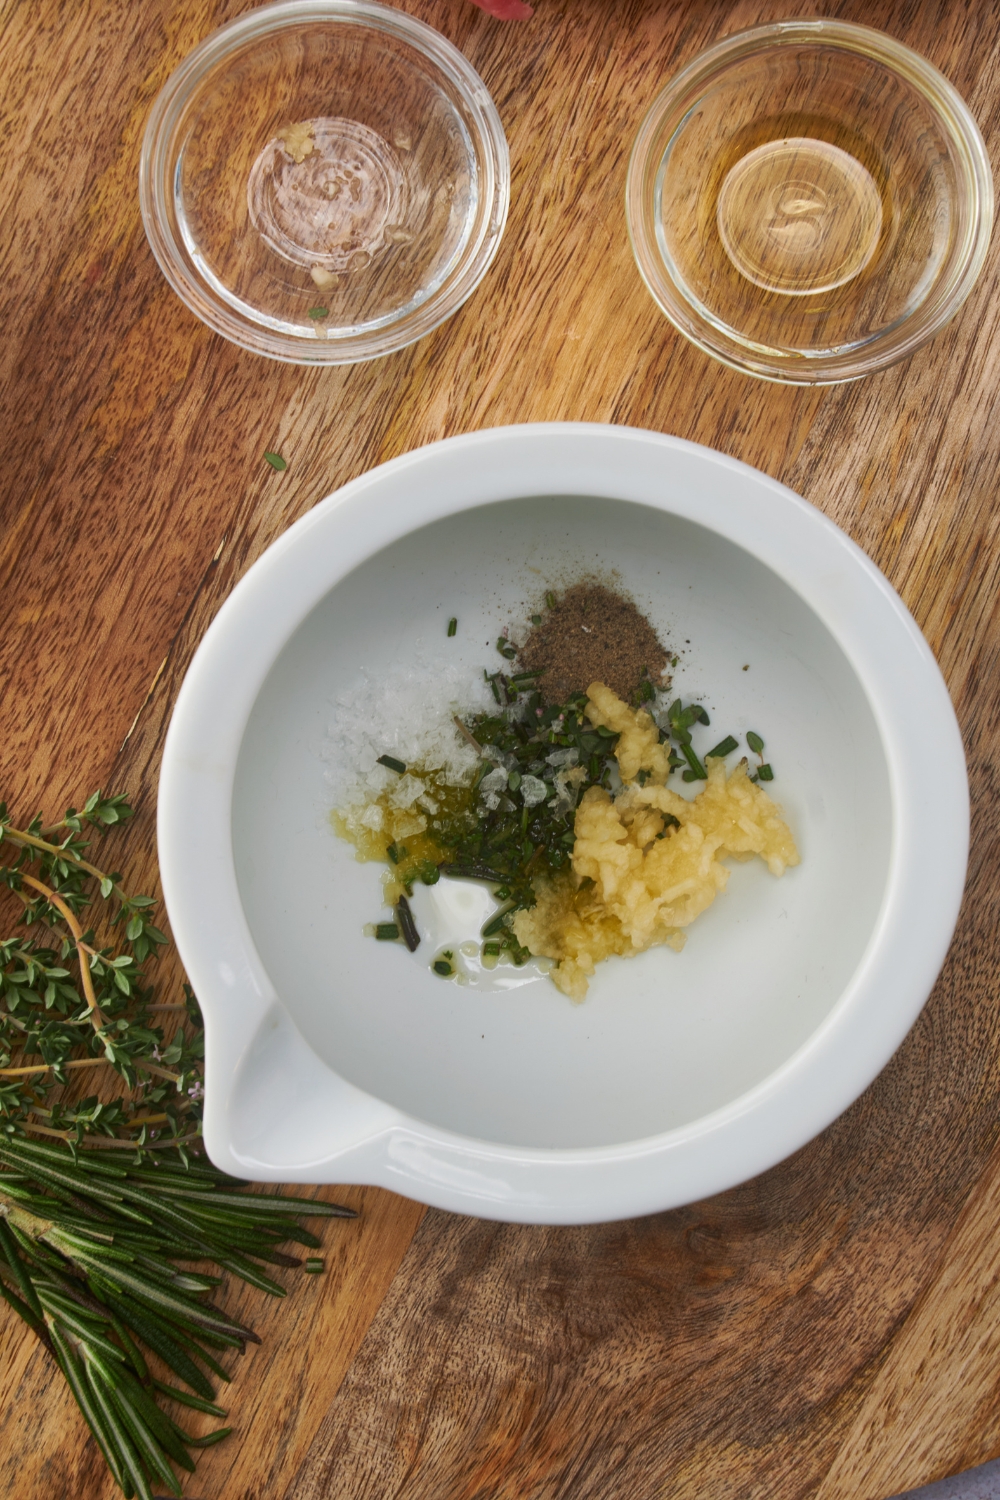 A white mortar with garlic and spices in it next to two empty bowls and fresh herbs.